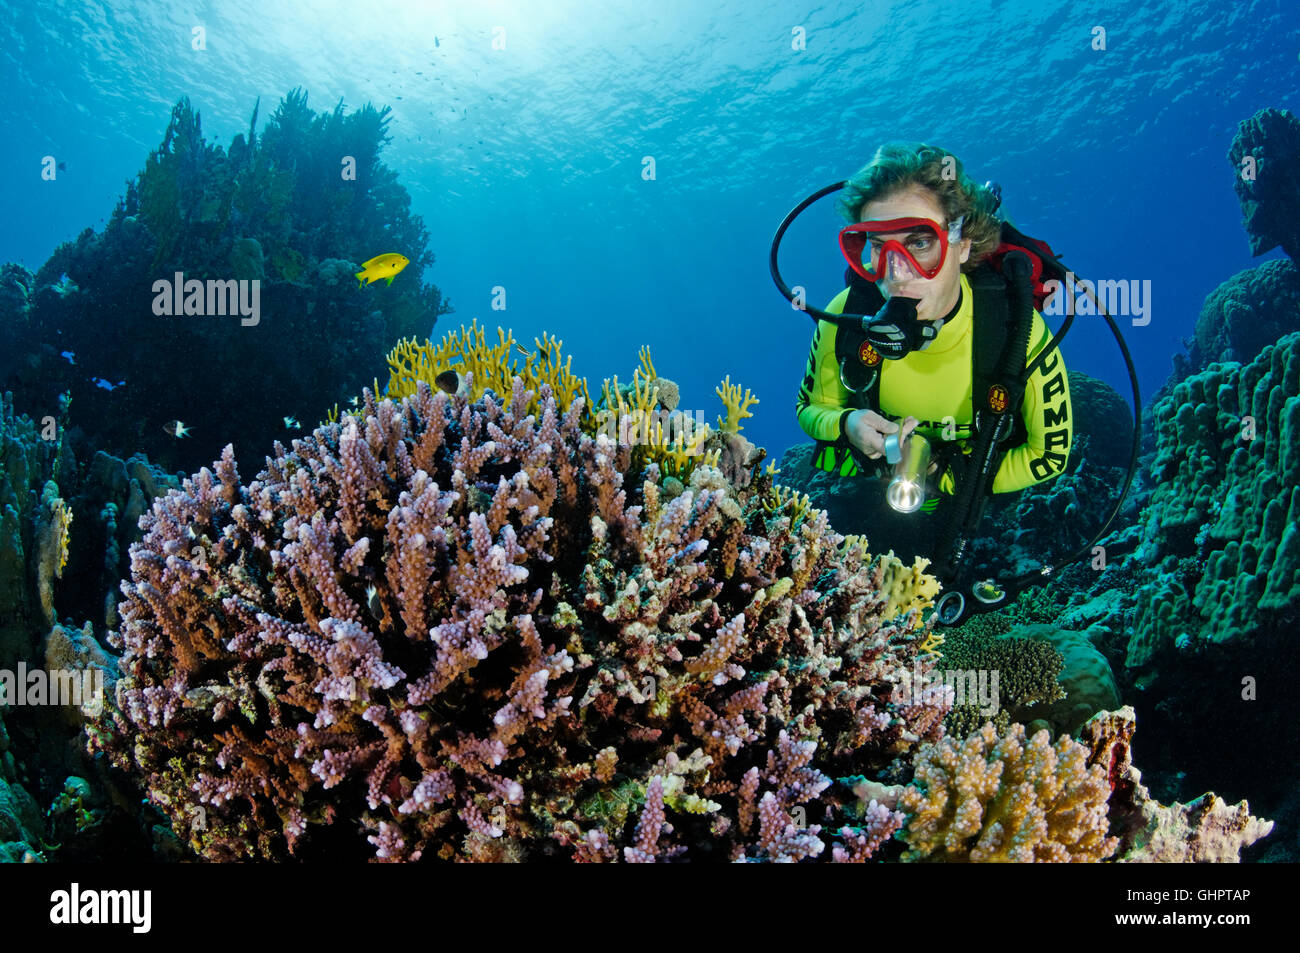 Acropora sp., stone coral reef and scuba diver, Zabargad Reef, El Gubal, Red Sea, Egypt, Africa Stock Photo